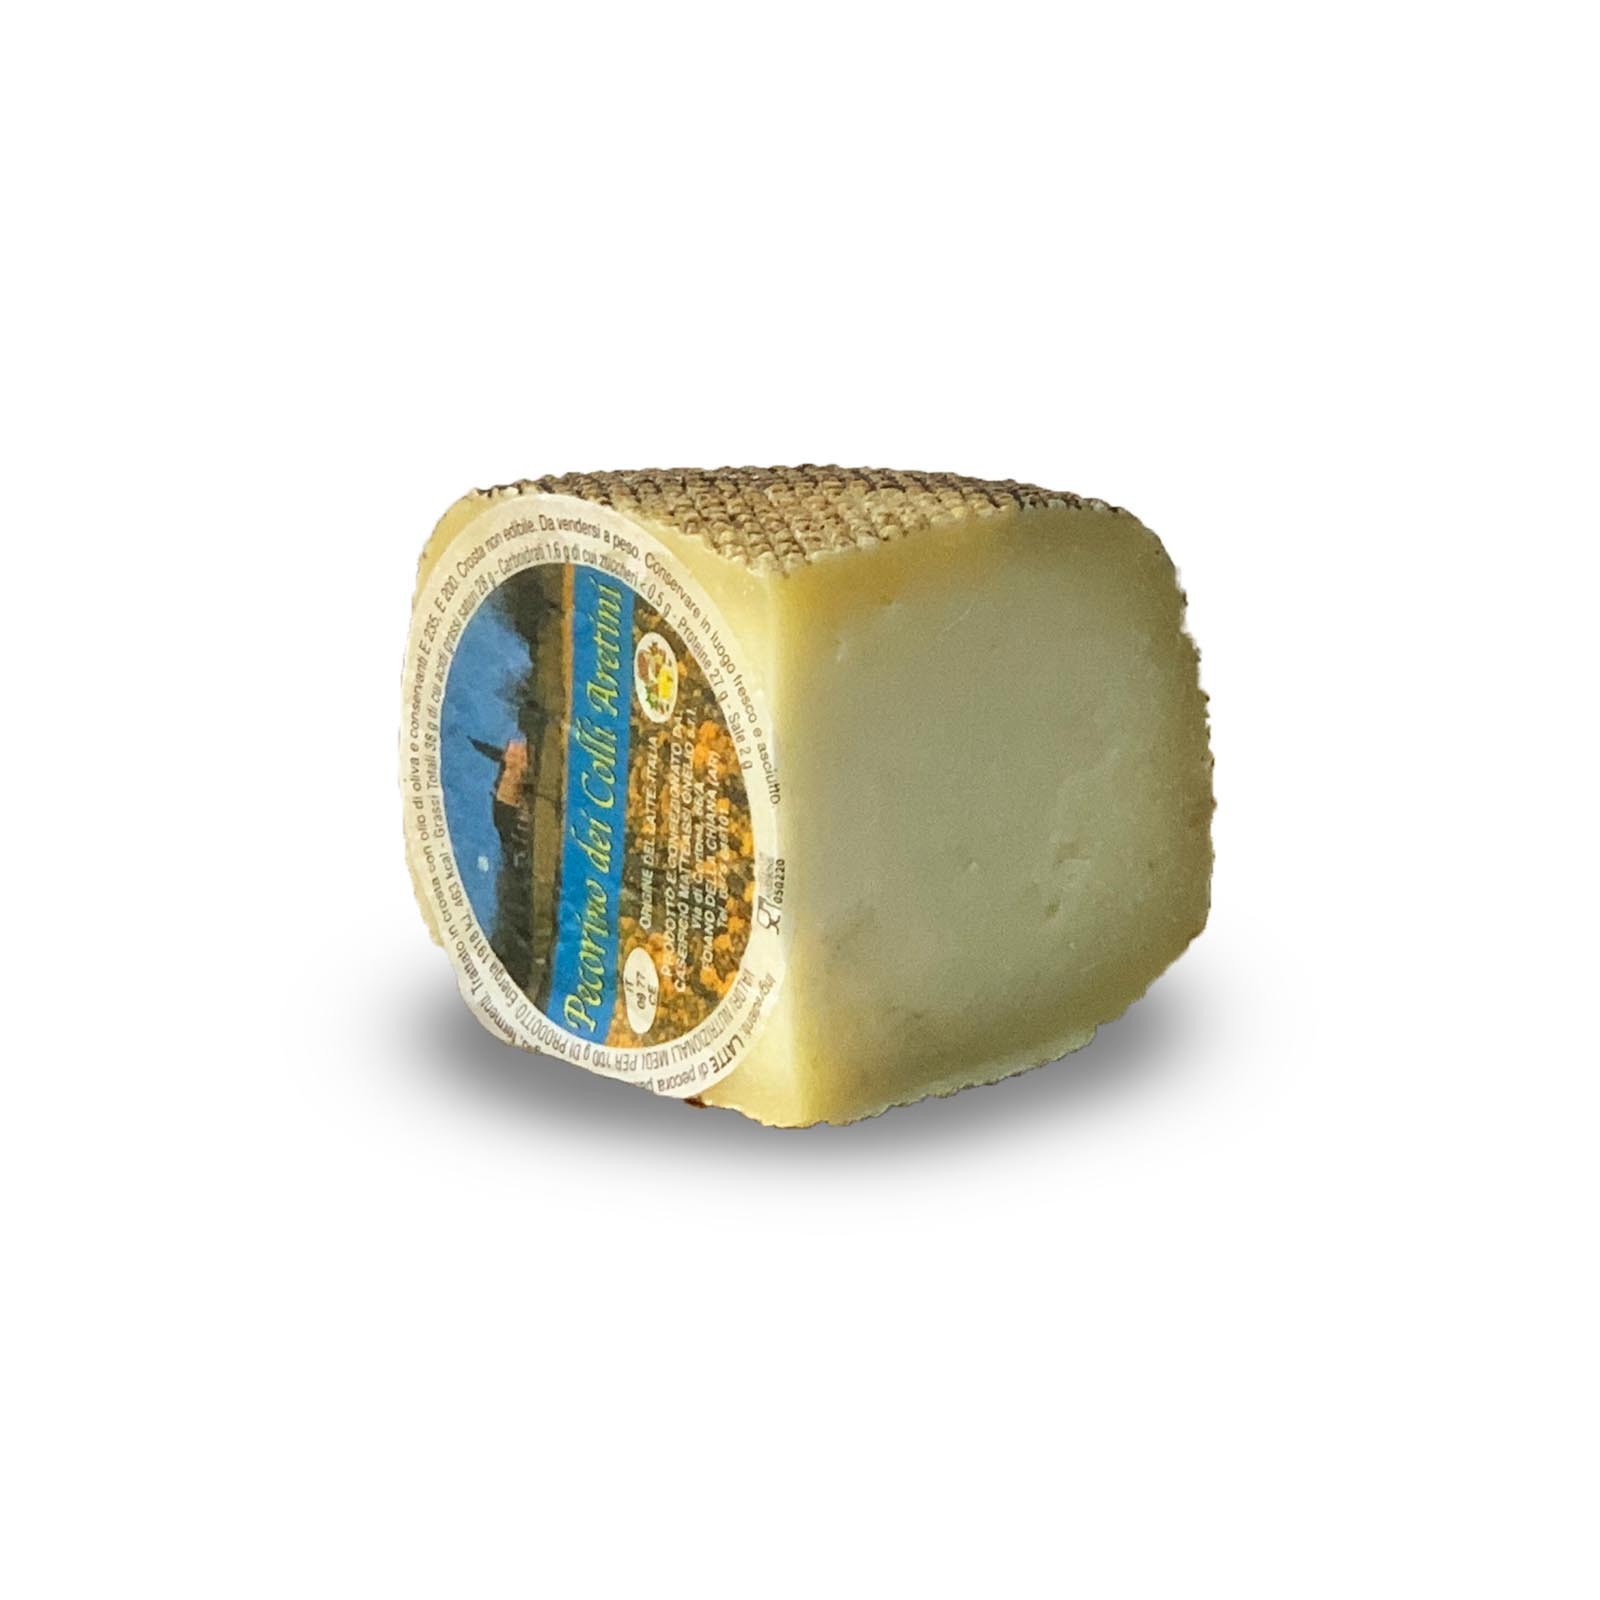 “Rigatello” Aged Tuscan Pecorino Cheese represents one of the most appreciated Tuscan excellences not only in Italy, but also abroad. Made using only pasteurized sheep’s milk and ingredients that refer to tradition, it is left to mature for about 120 days so that it can take on its characteristic intense flavor that goes well both at the table and grated on dishes.